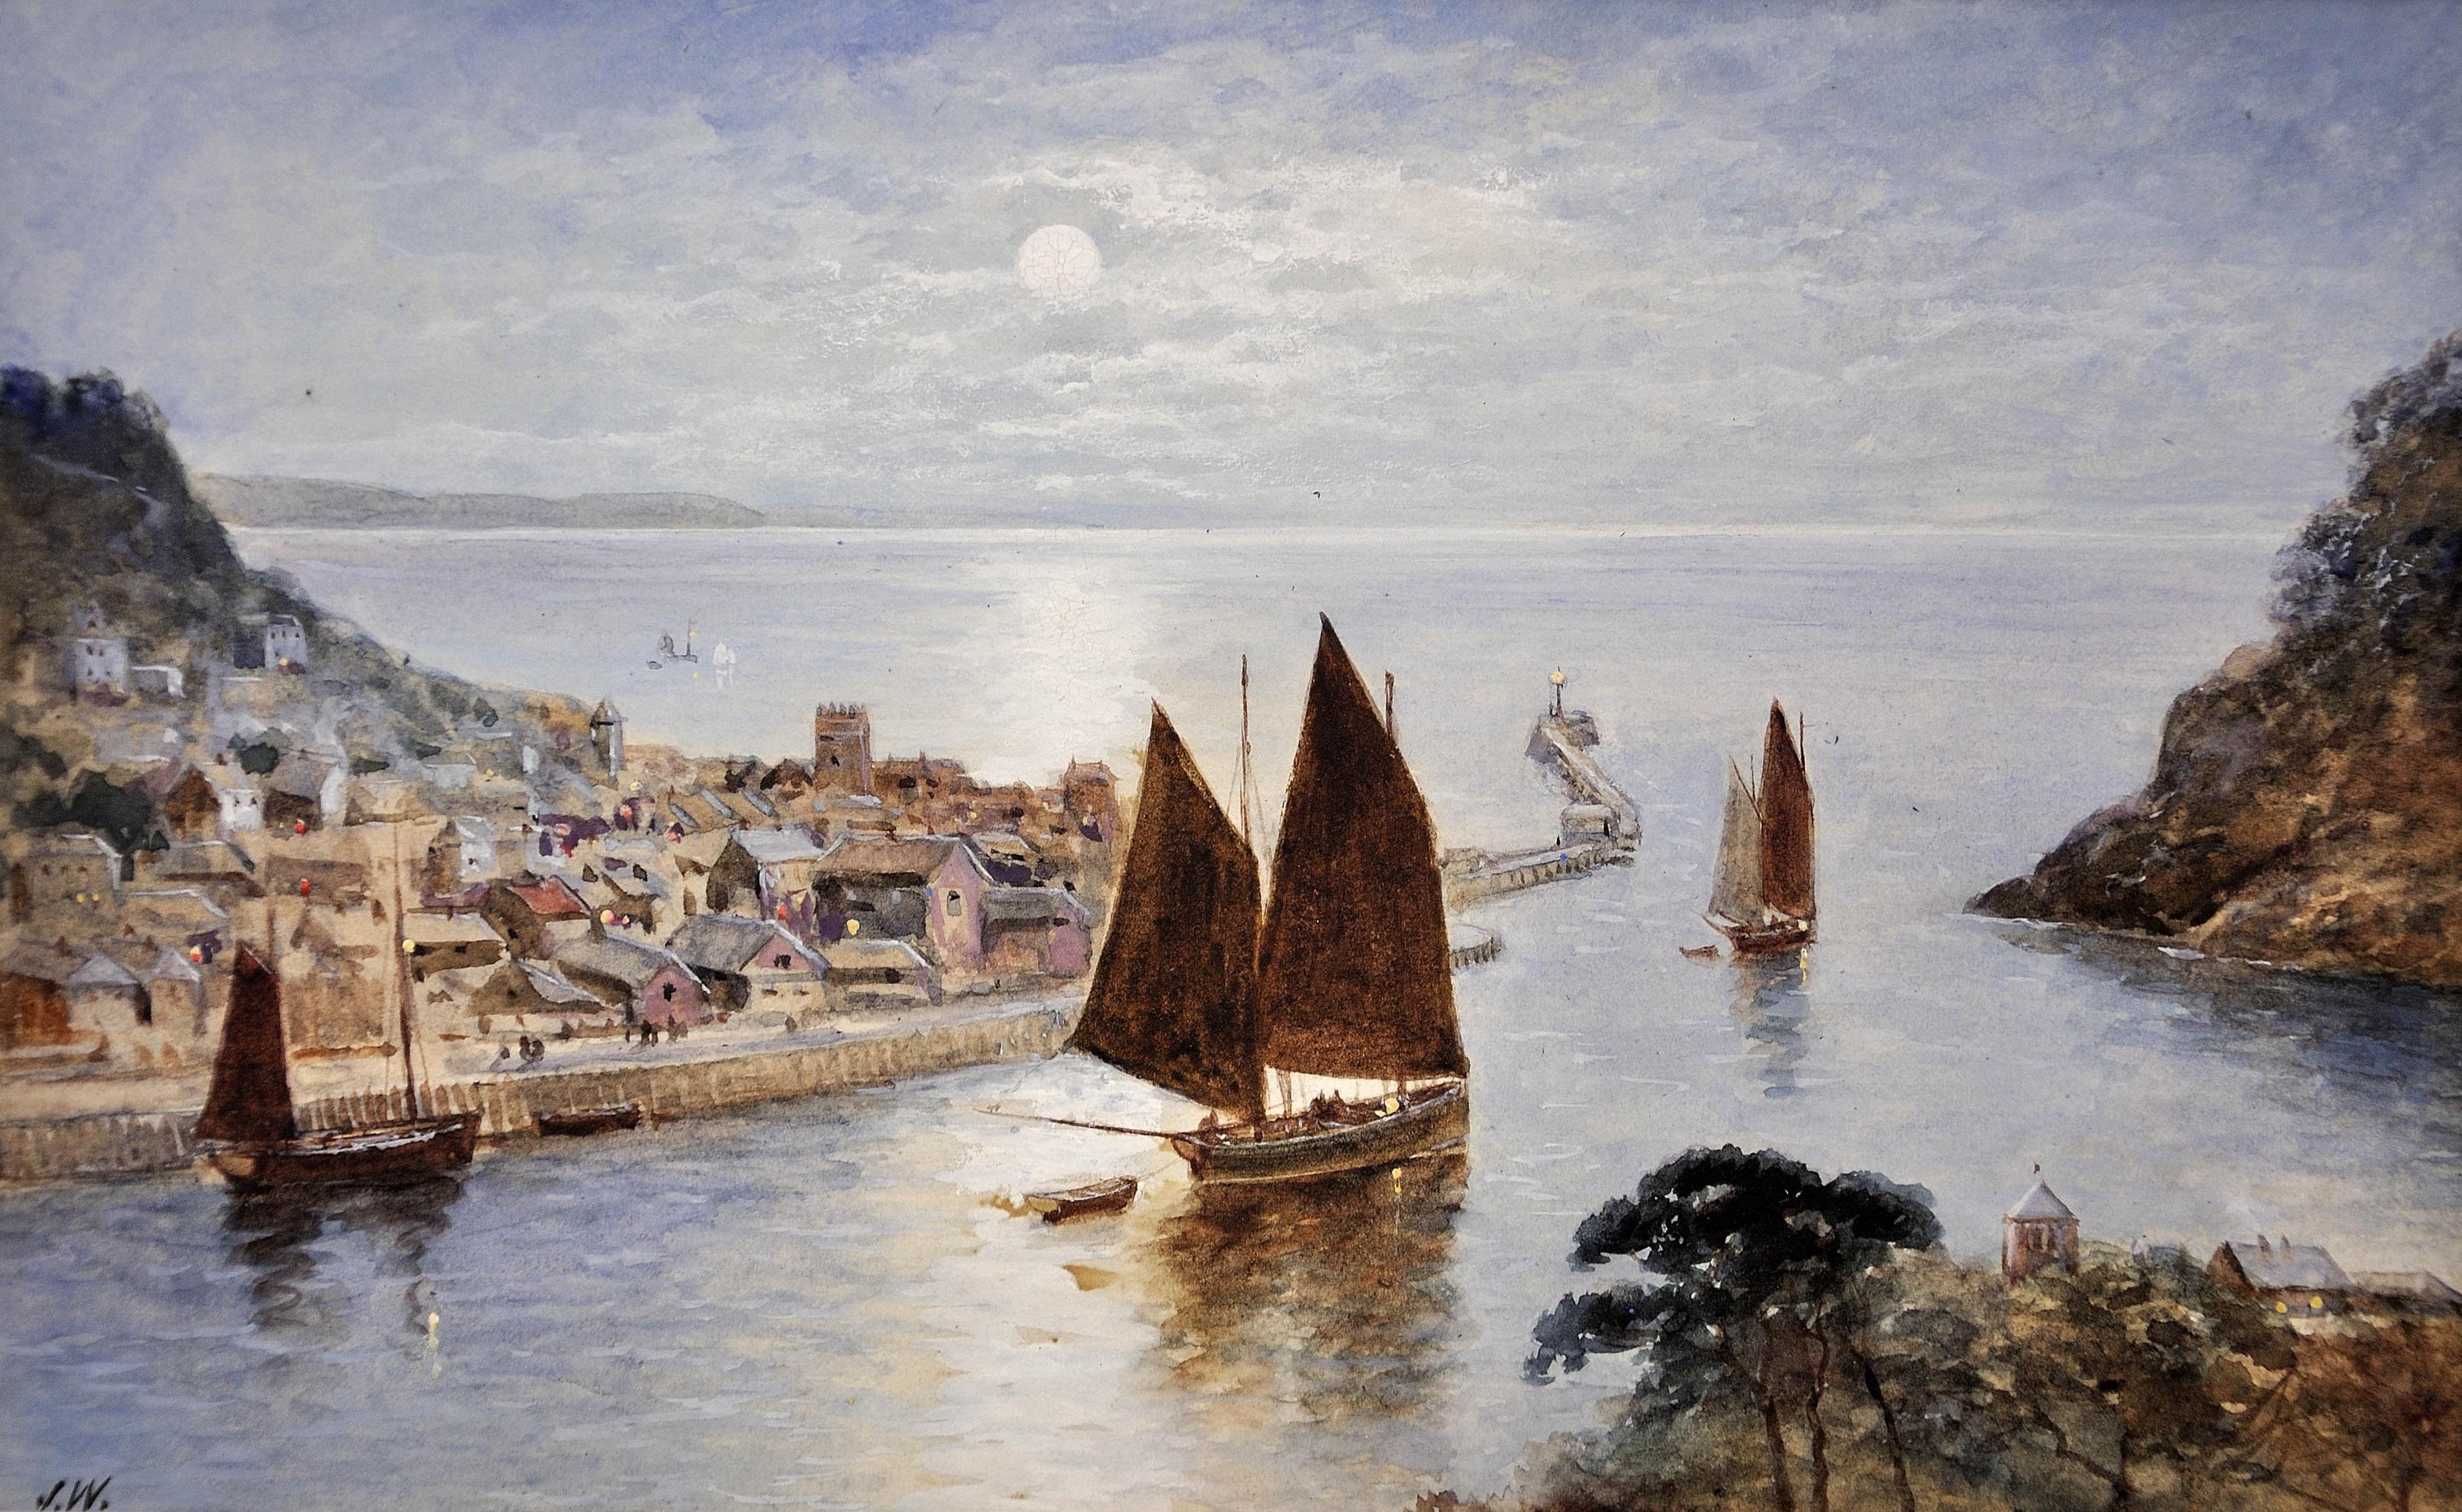 Looe Town & Harbor, Cornwall. Luggers Under Sail. Early Morning. Circa 1860. - Art by J. Wilson